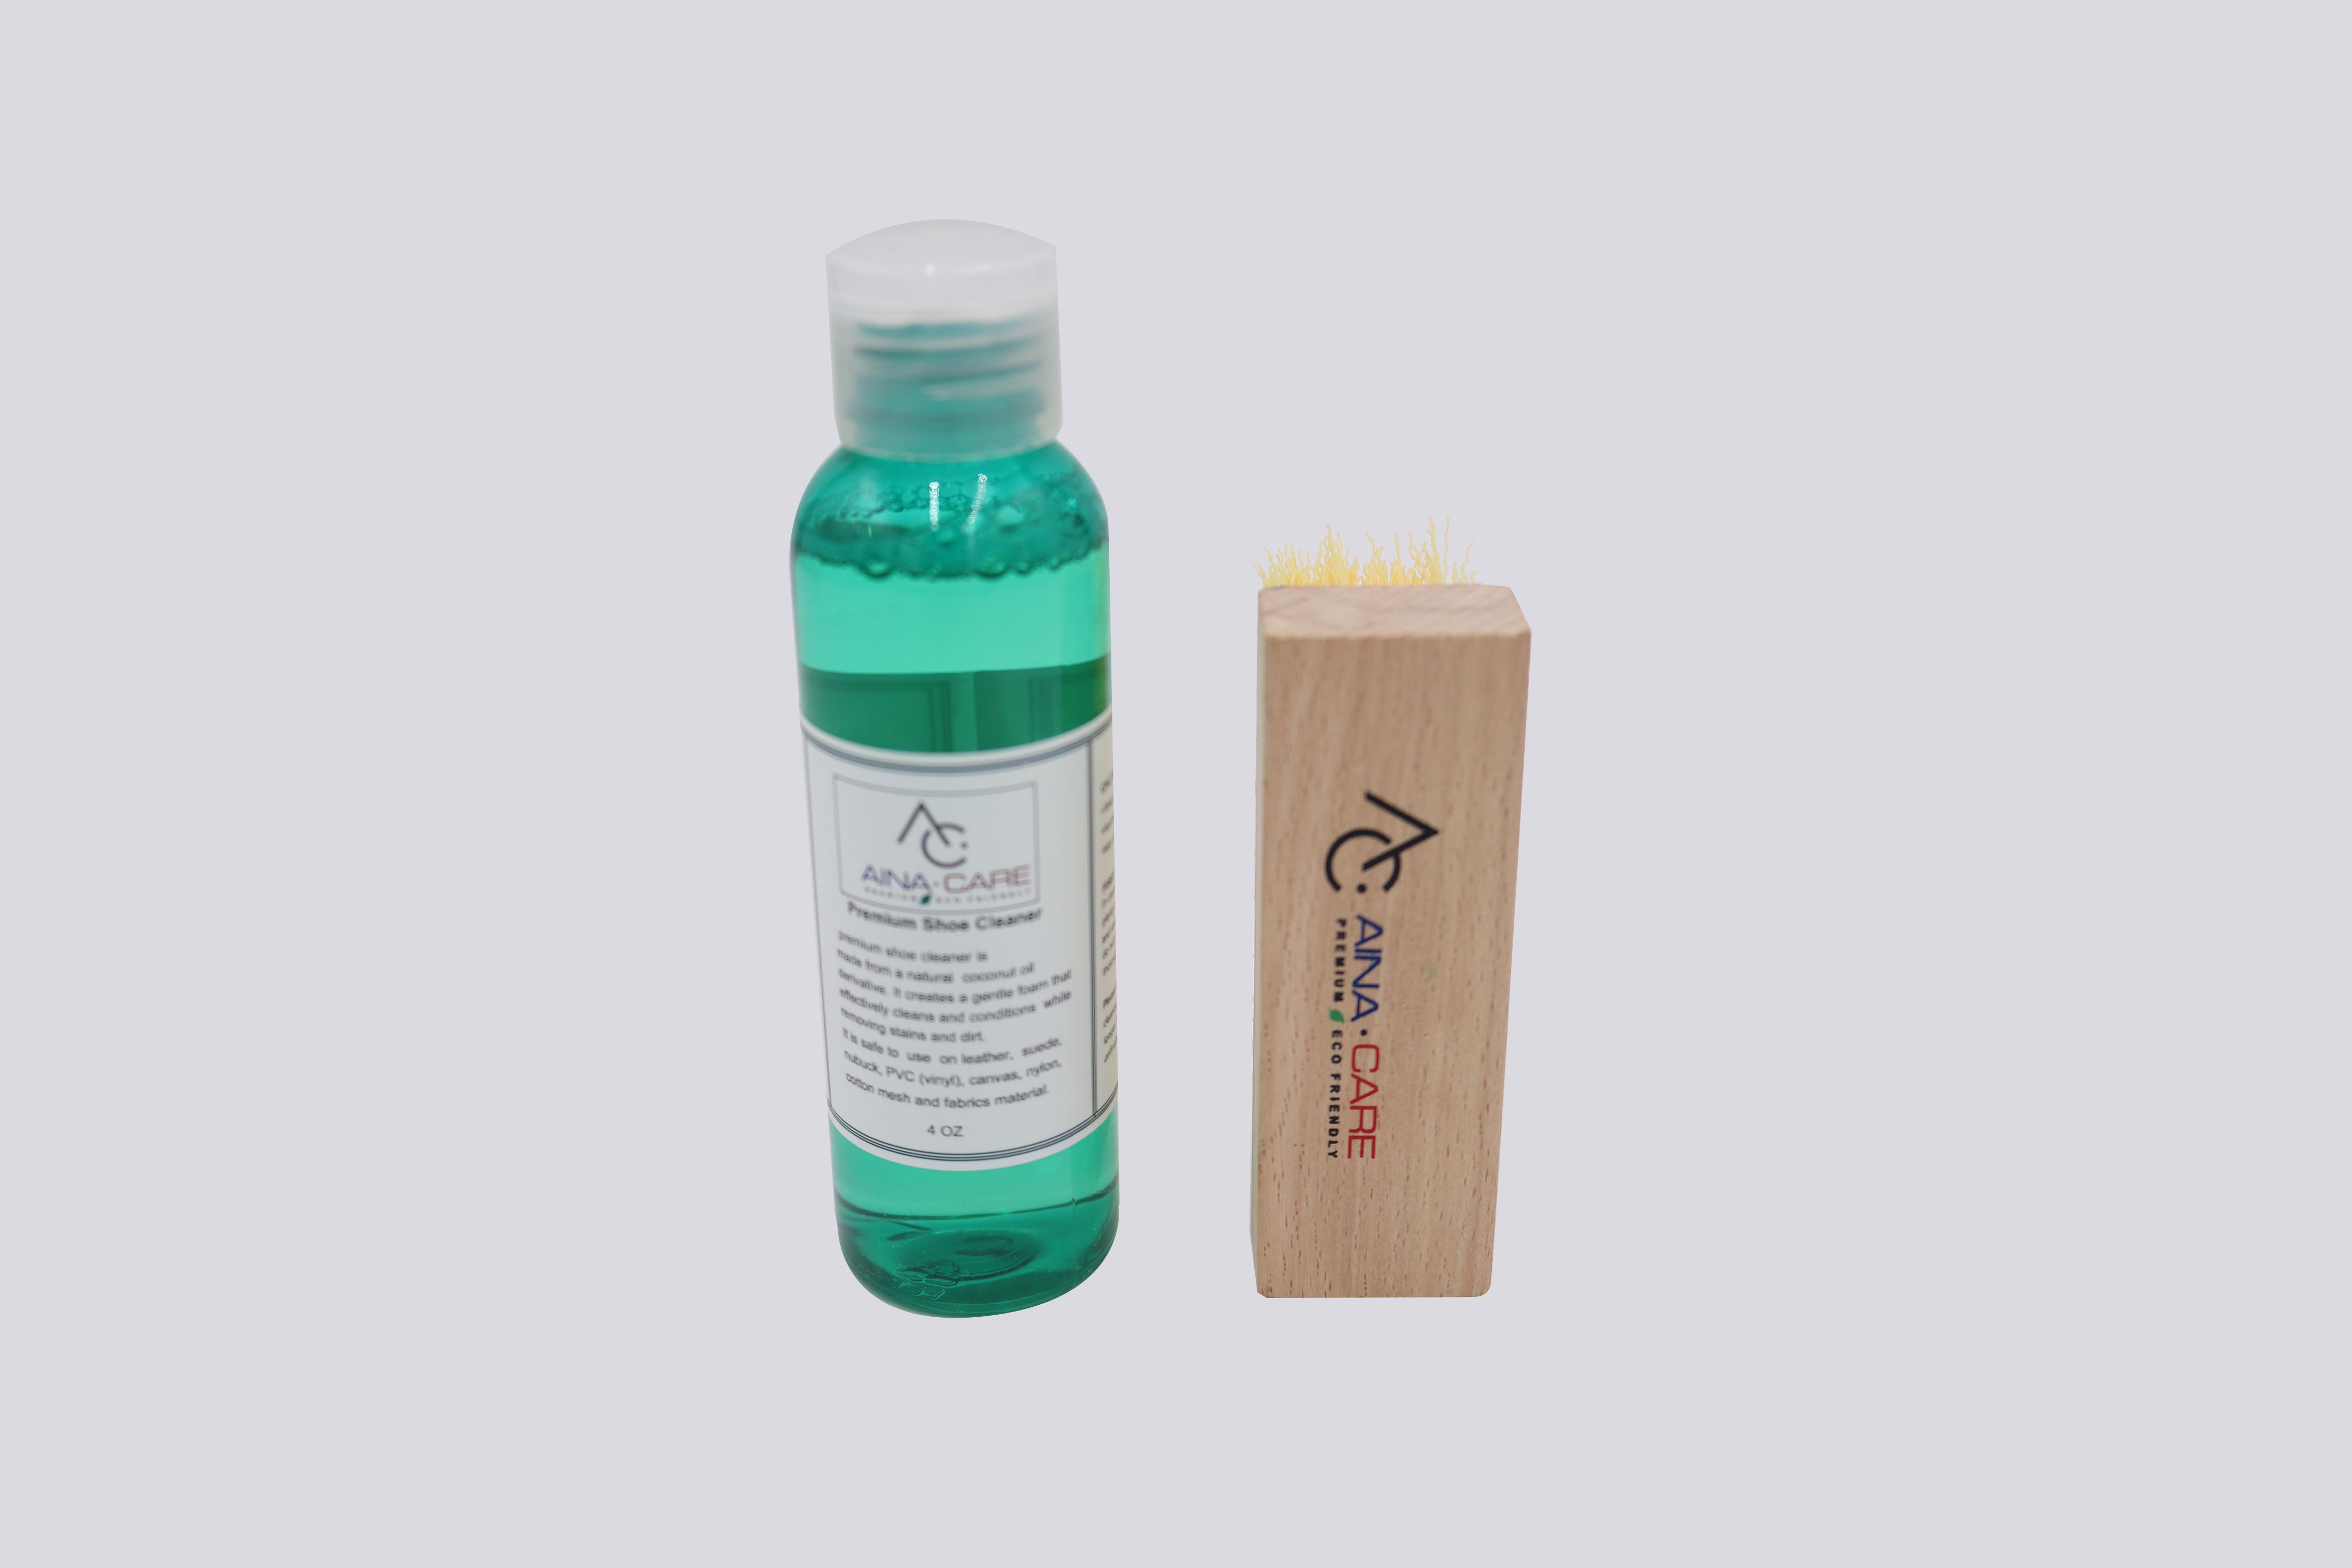 A bottle of Premium Shoe Cleaner and a hand brush from AinaCare.